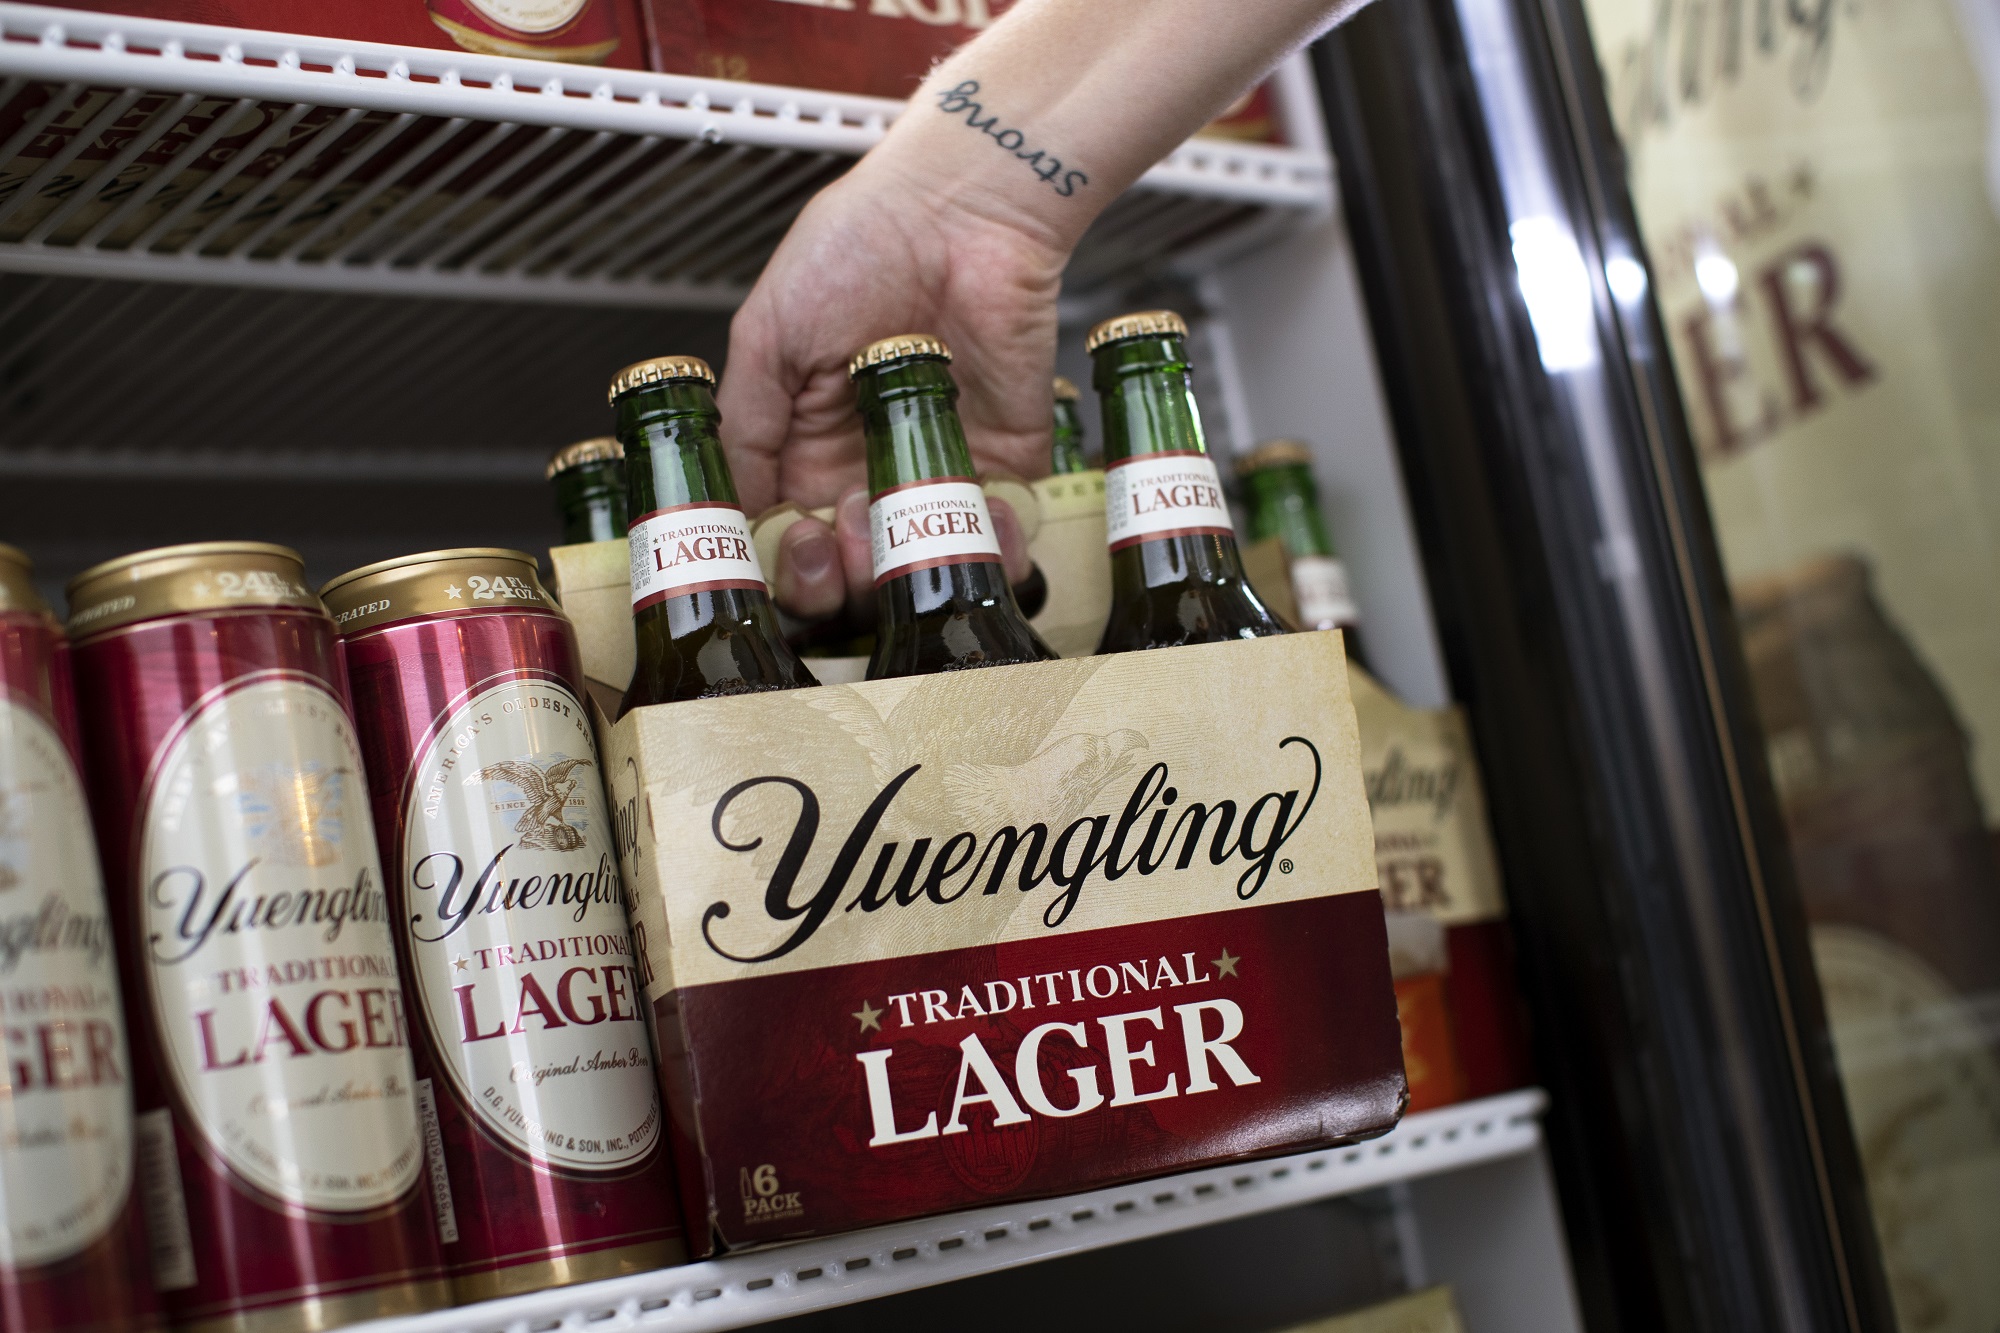 Yuengling-Lager-cooler-six-pack-No.-1-craft-brewing-company.jpg